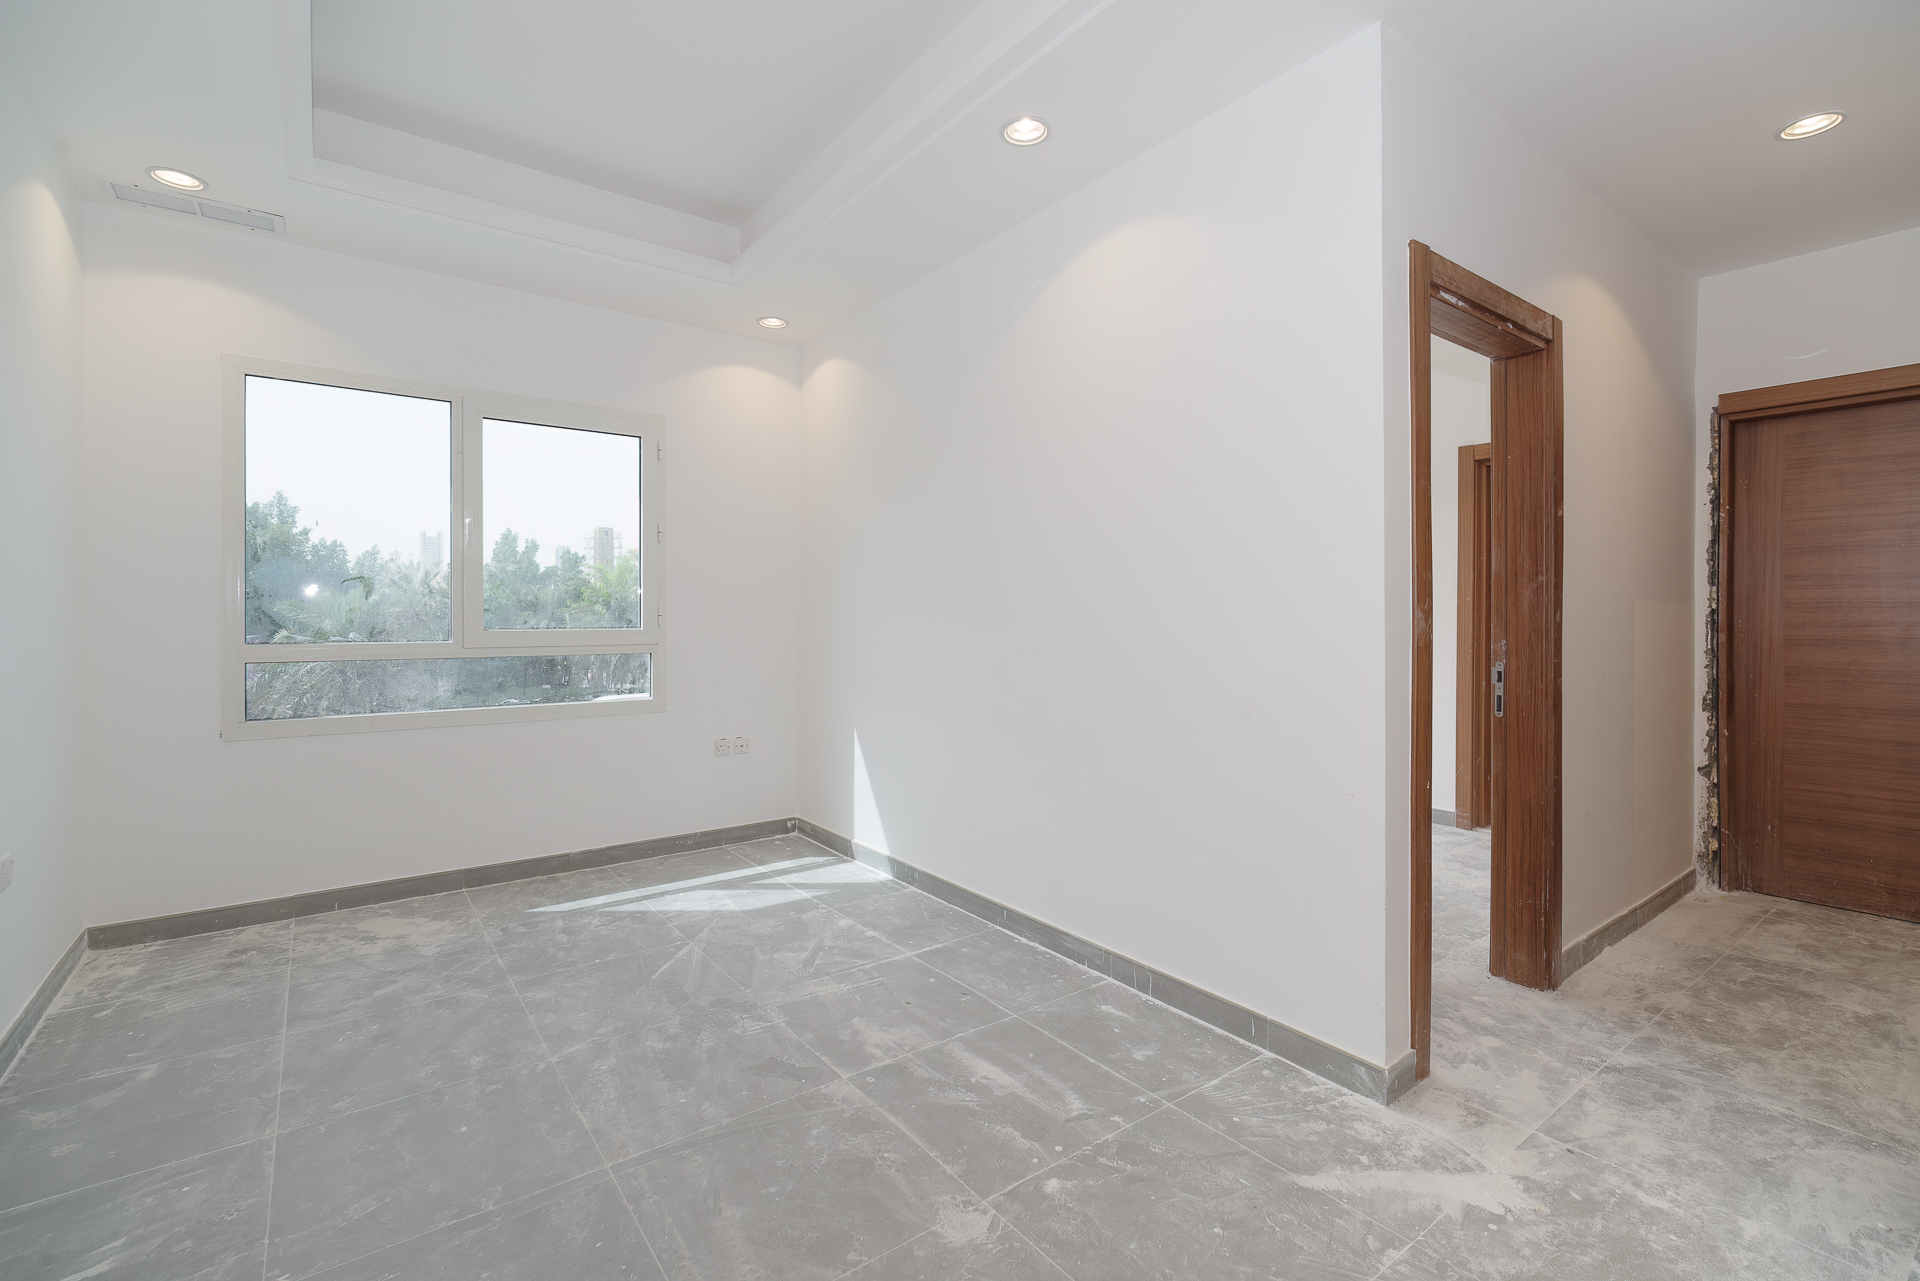 Shaab – new, small, 65 m2 unfurnished two bedroom apartments